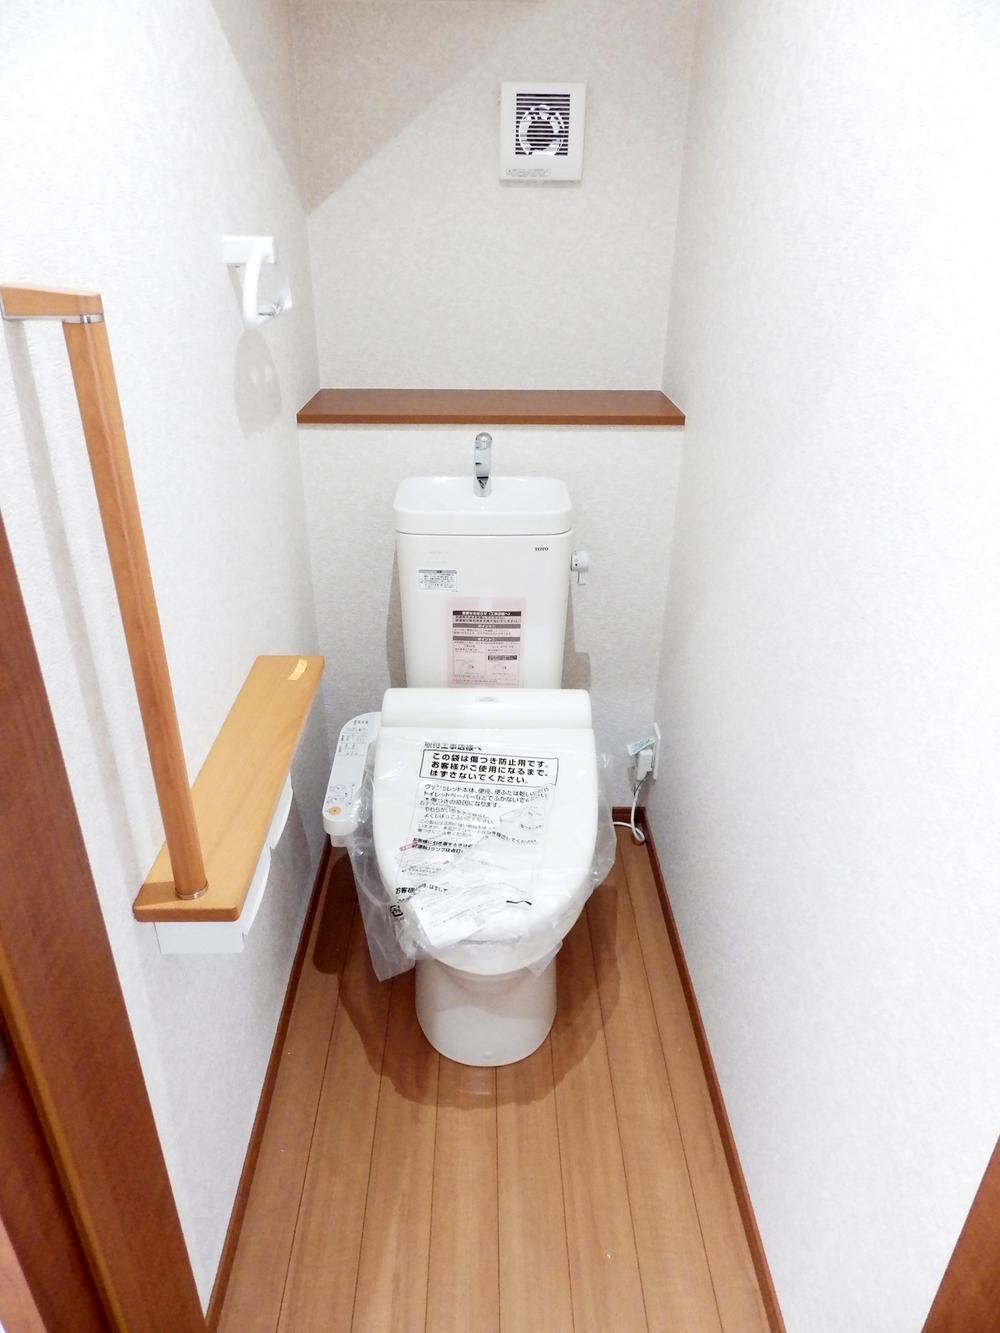 Toilet. It is a high-function toilet with a heated toilet seat.